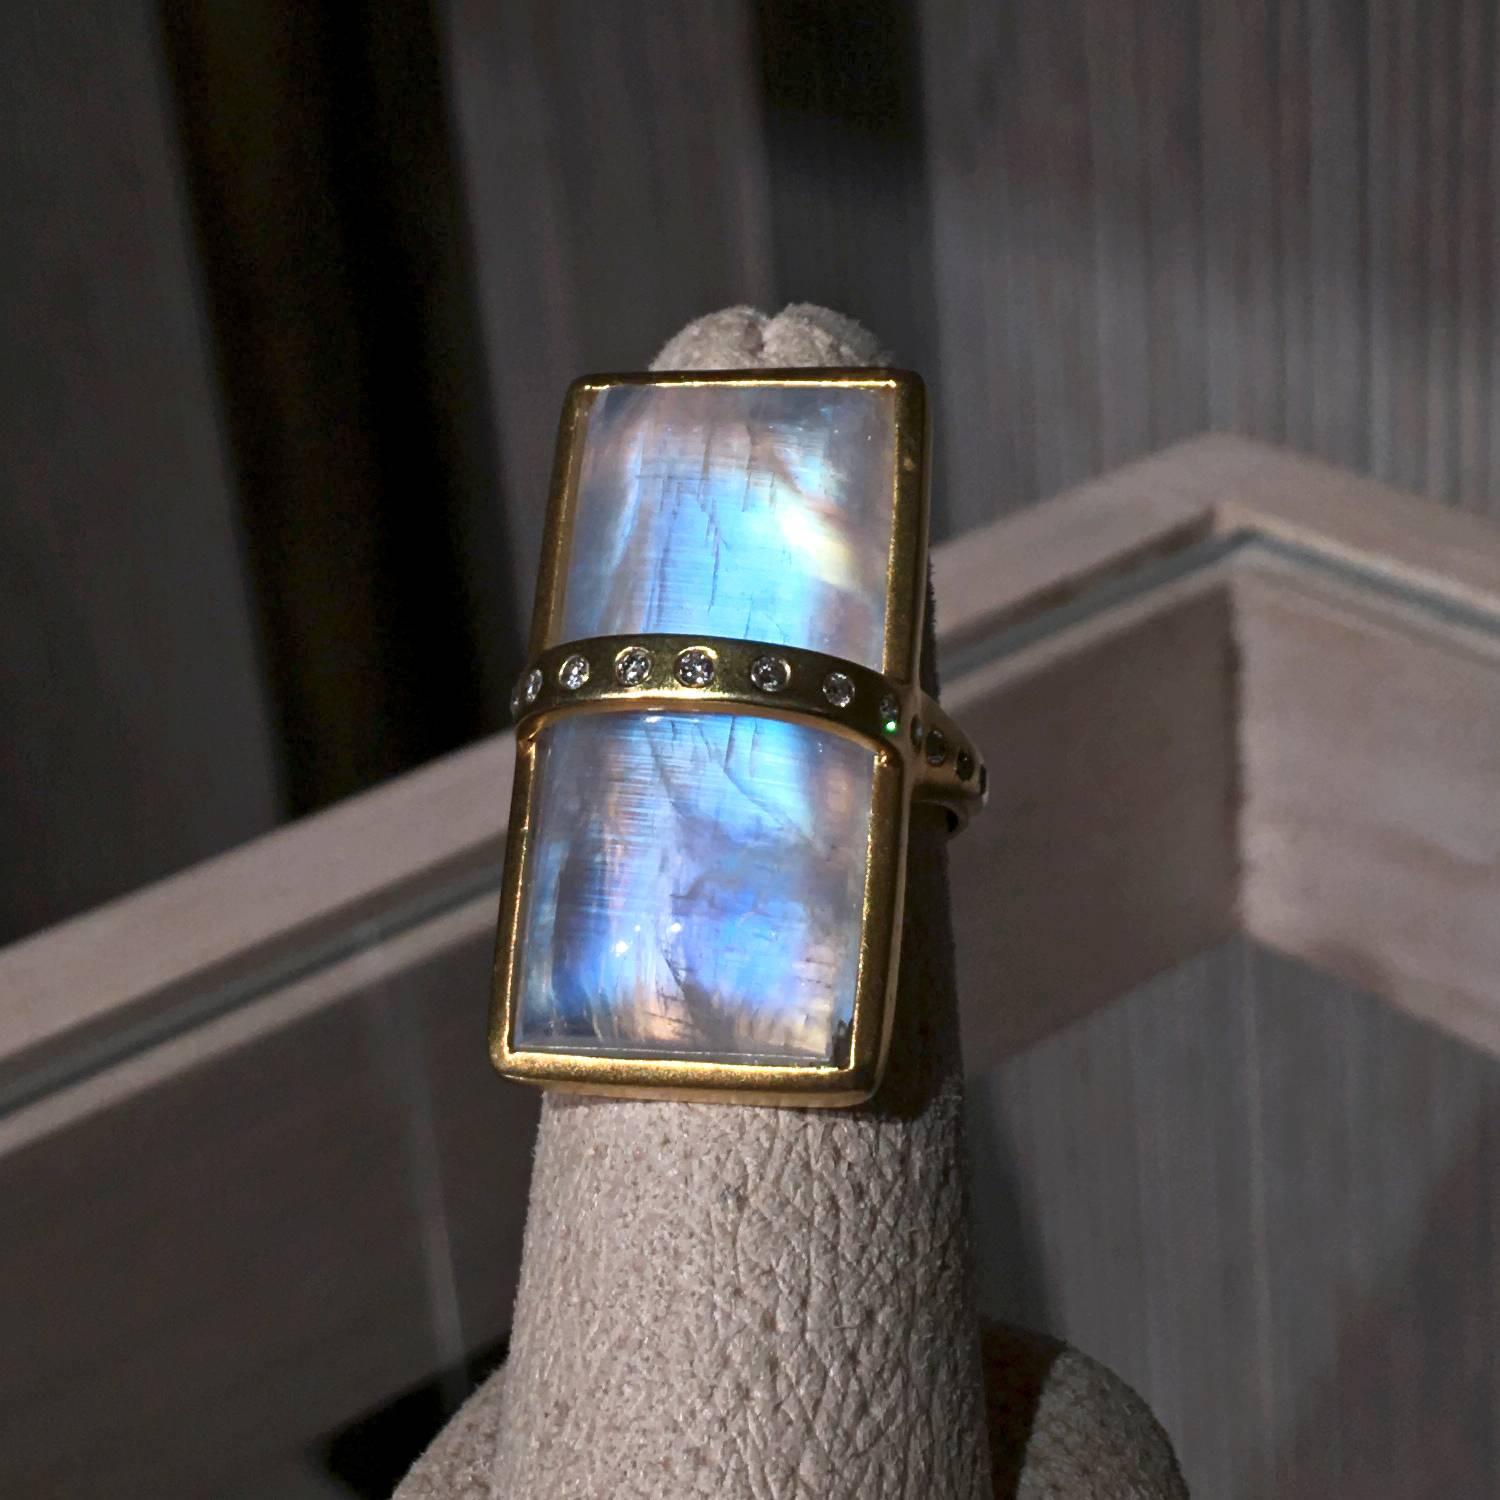 One-of-a-Kind Bar Ring handcrafted by award-winning jewelry designer Lauren Harper in matte-finish 18k yellow gold with a bezel-set rectangular cabochon-cut rainbow moonstone showcasing primarily blue and violet hues with flashes of orange, red, and